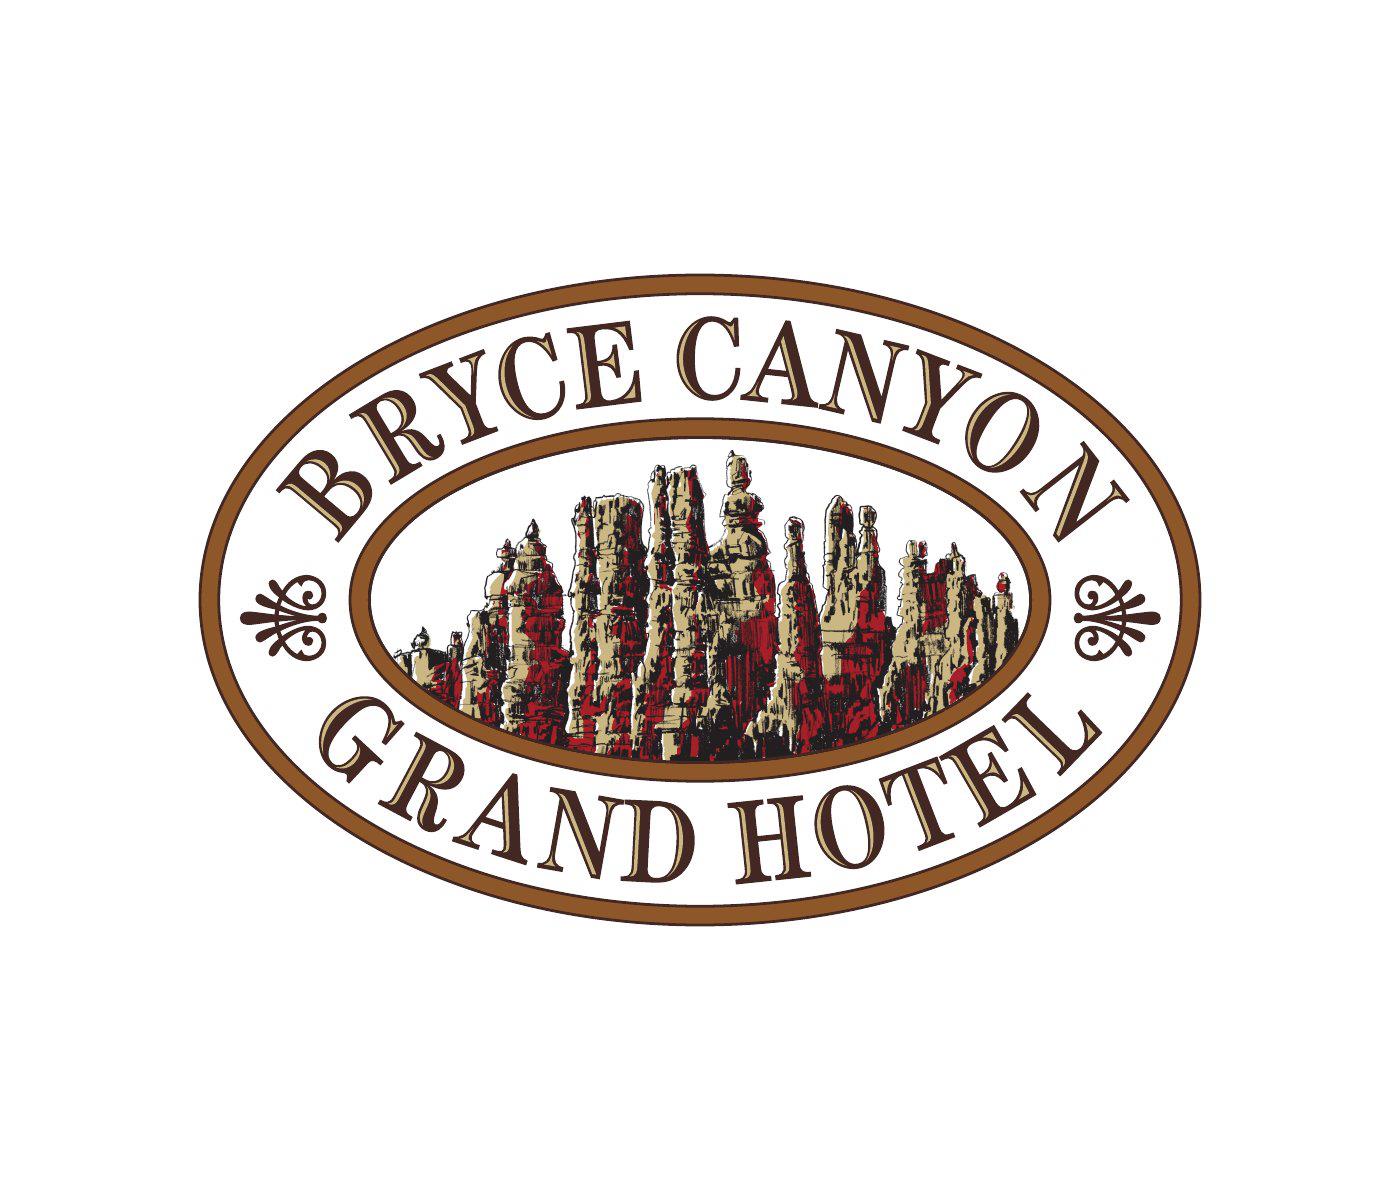 Bryce Canyon Grand Hotel | lodging | 30 N 100 E, Bryce Canyon City, UT 84764, United States | 4358345700 OR +61 435-834-5700